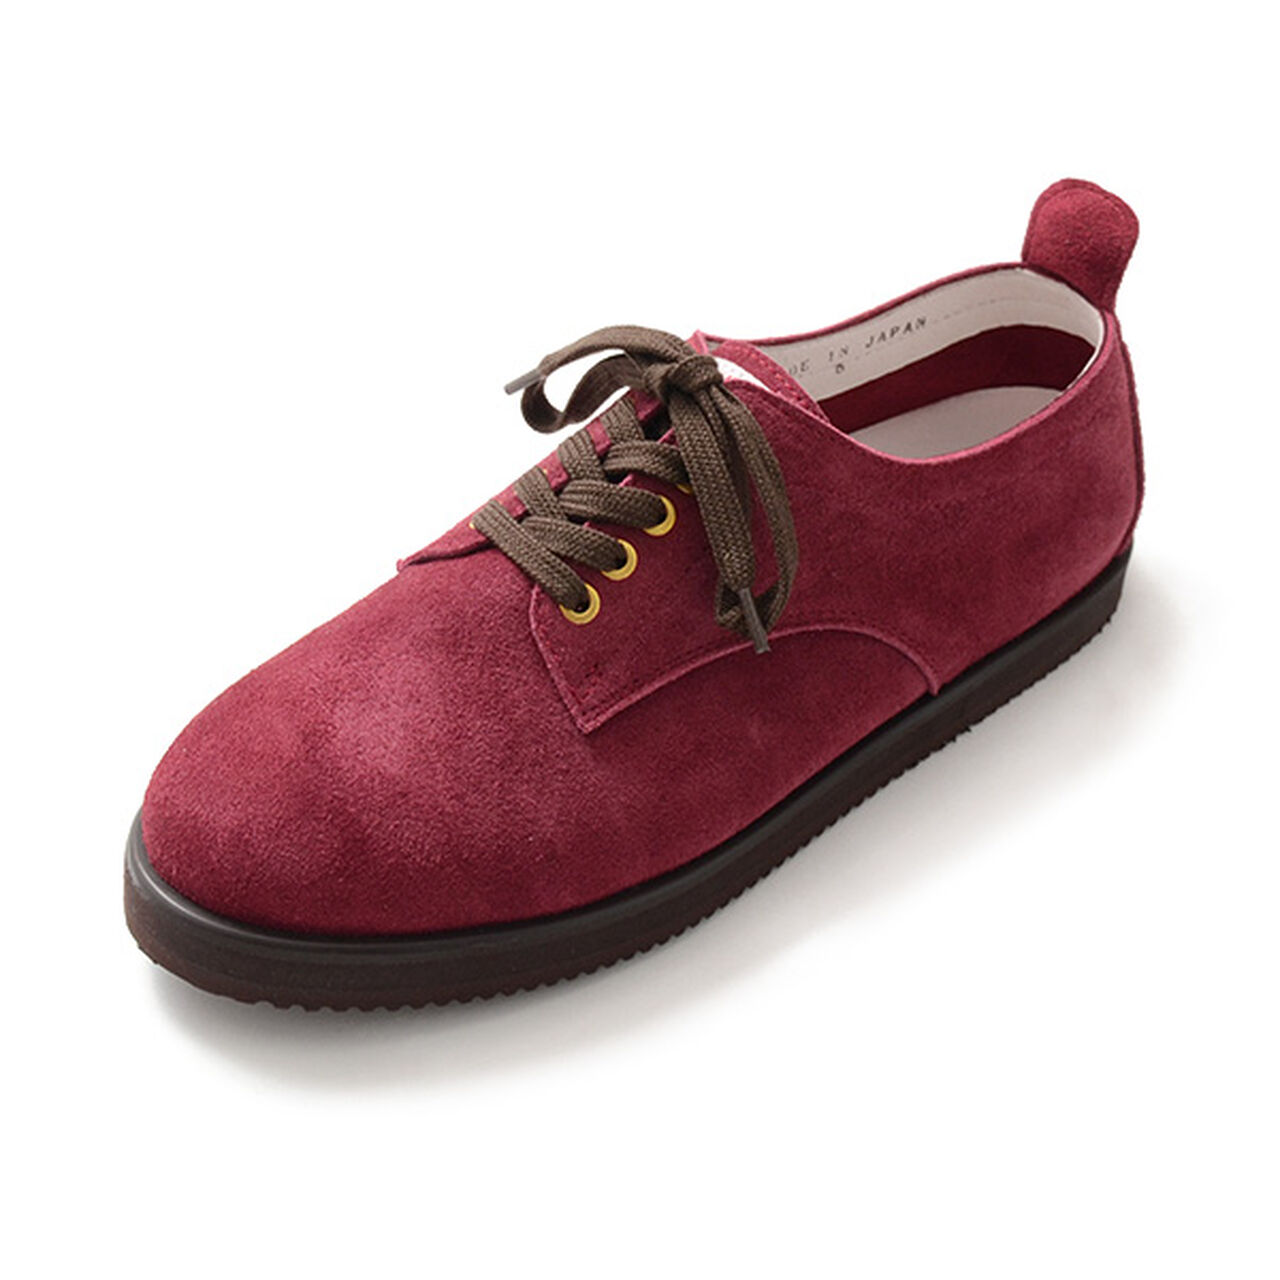 Riesel / Suede Leather Shoes,Burgundy, large image number 0